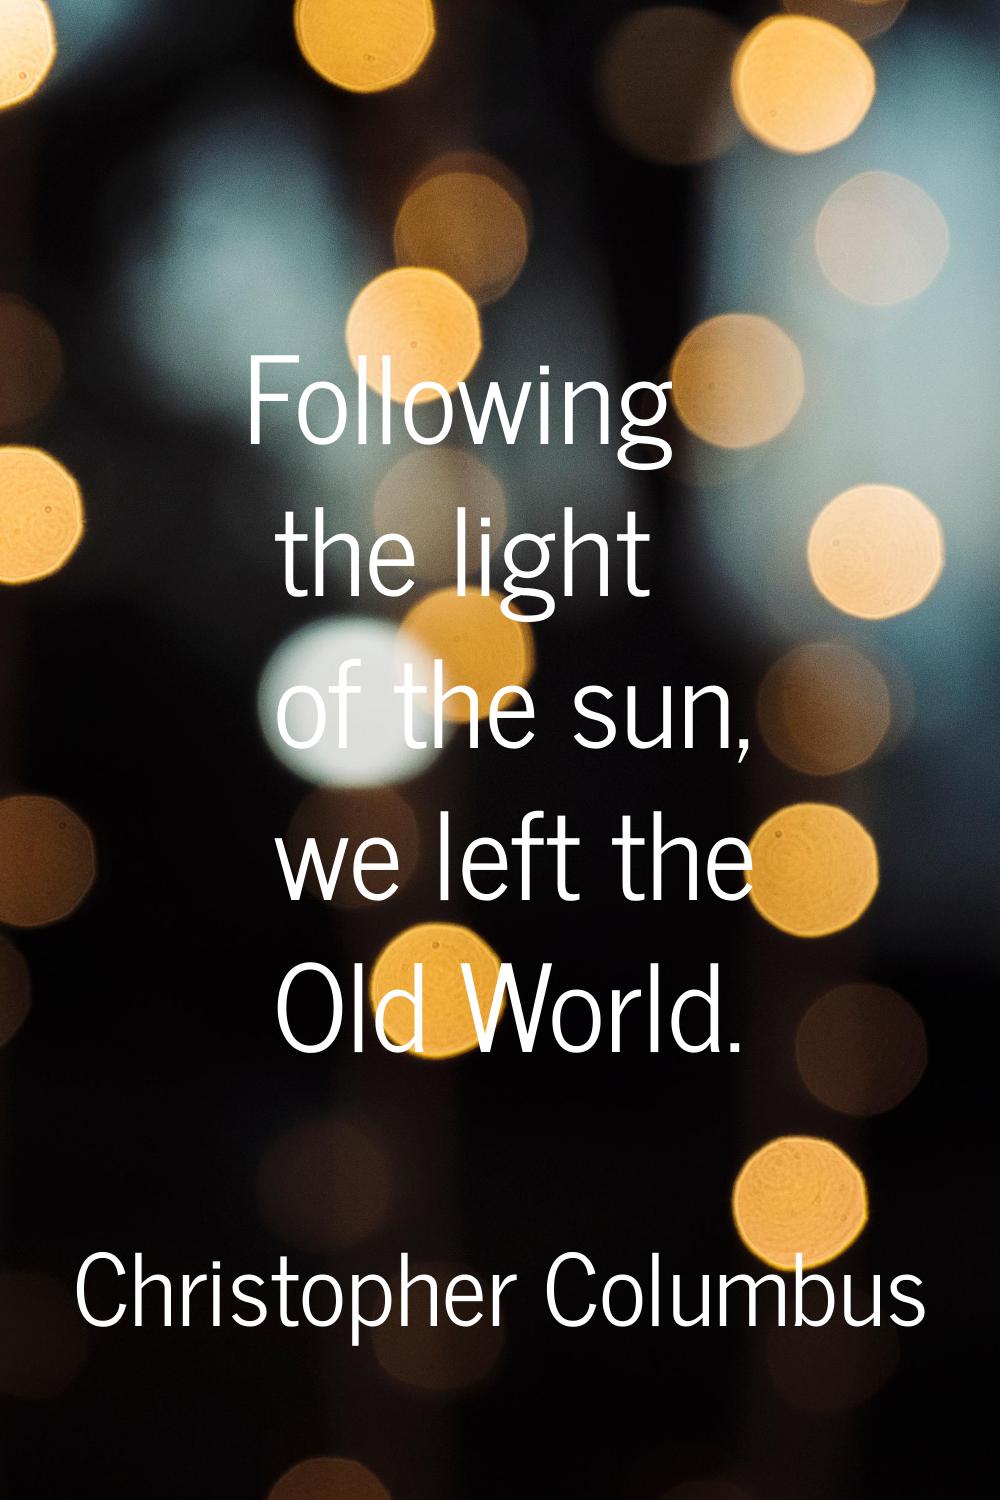 Following the light of the sun, we left the Old World.